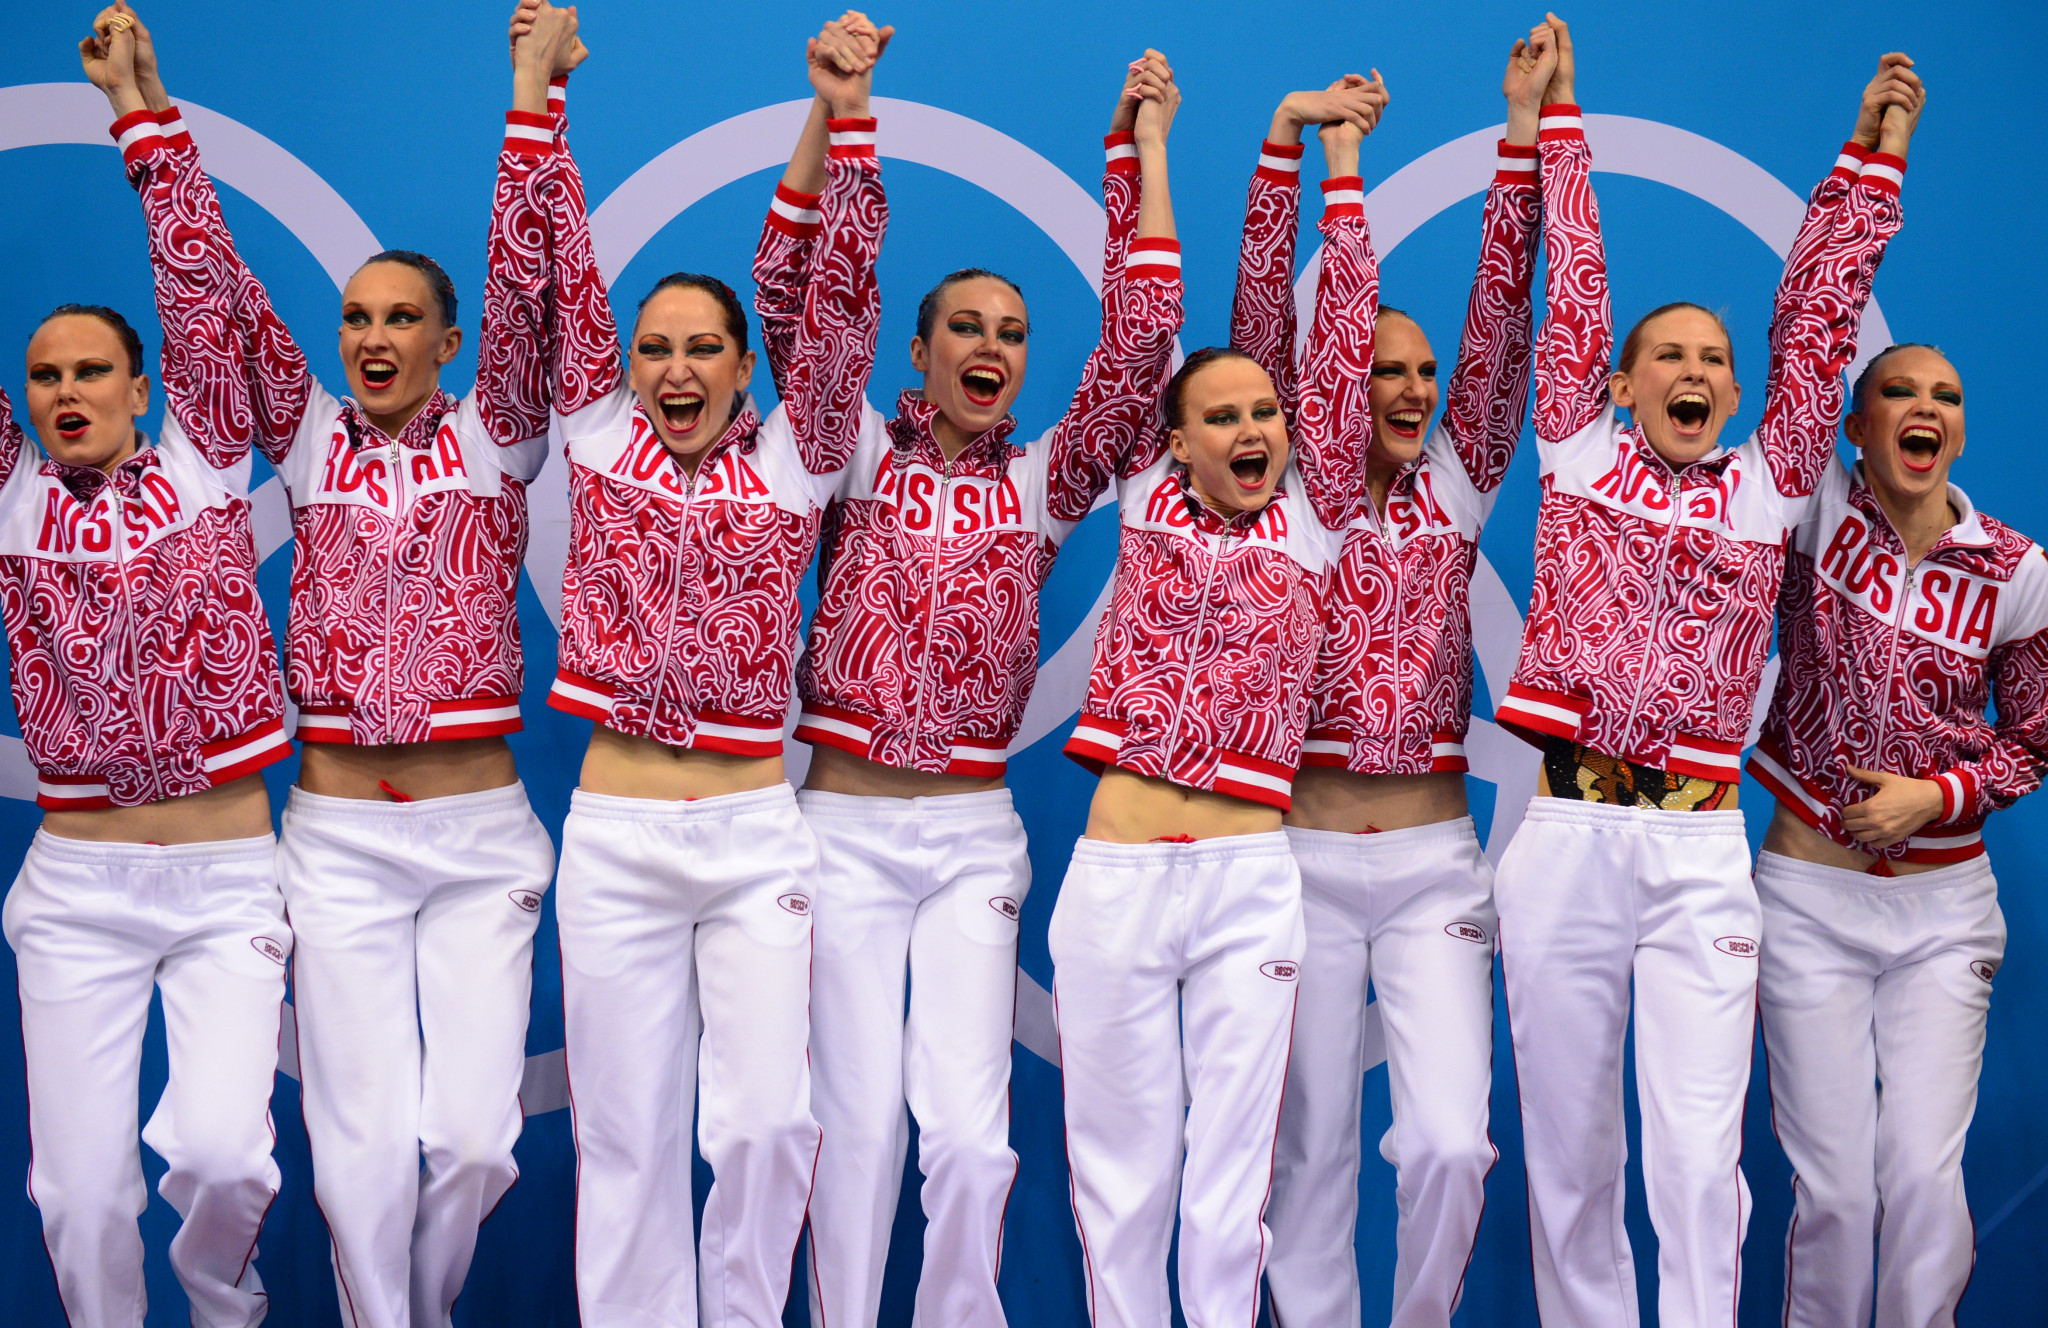 Angelika Timanina, fourth from left, is the latest Yekaterinburg 2023 ambassador ©Getty Images

